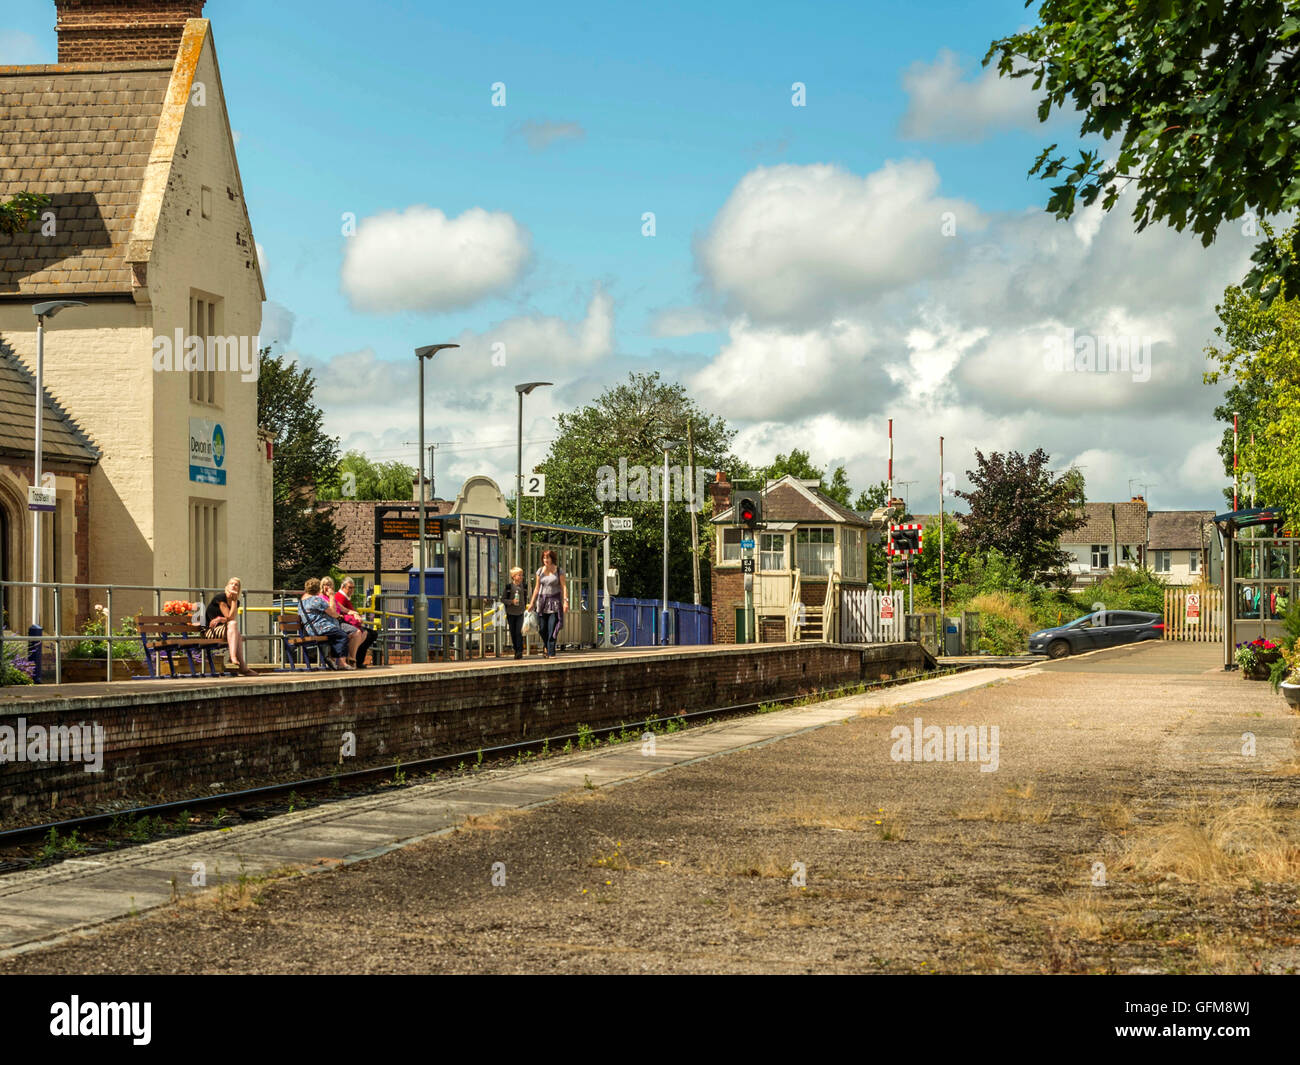 Passengers wait for a First Great Western Train to arrive at pretty Topsham station bound for Exeter along the Avocet line. Stock Photo